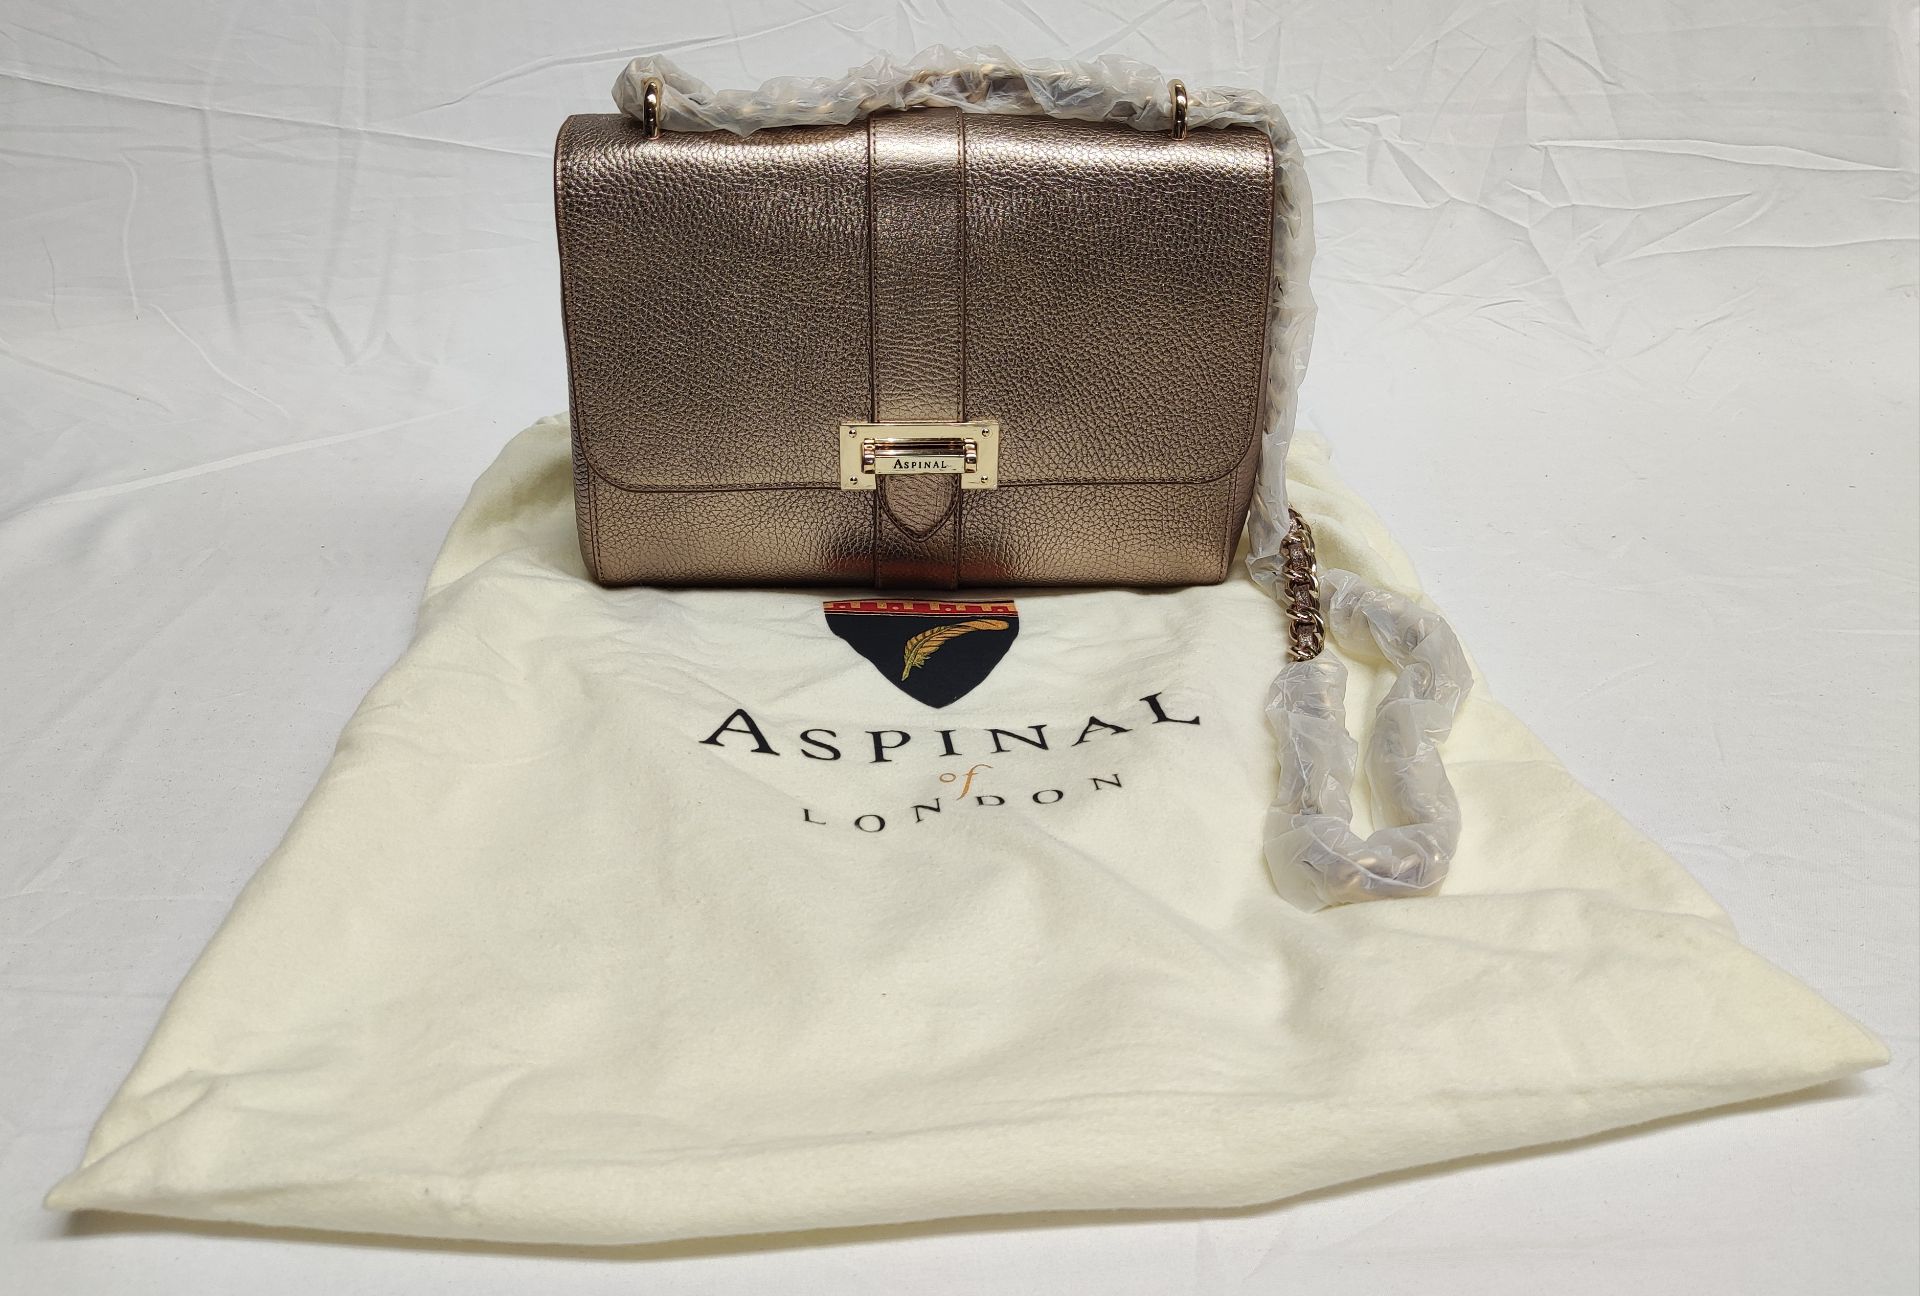 1 x ASPINAL OF LONDON Lottie Small Leather Shoulder Bag In Champagne - New/Boxed - Original RRP £550 - Image 11 of 19